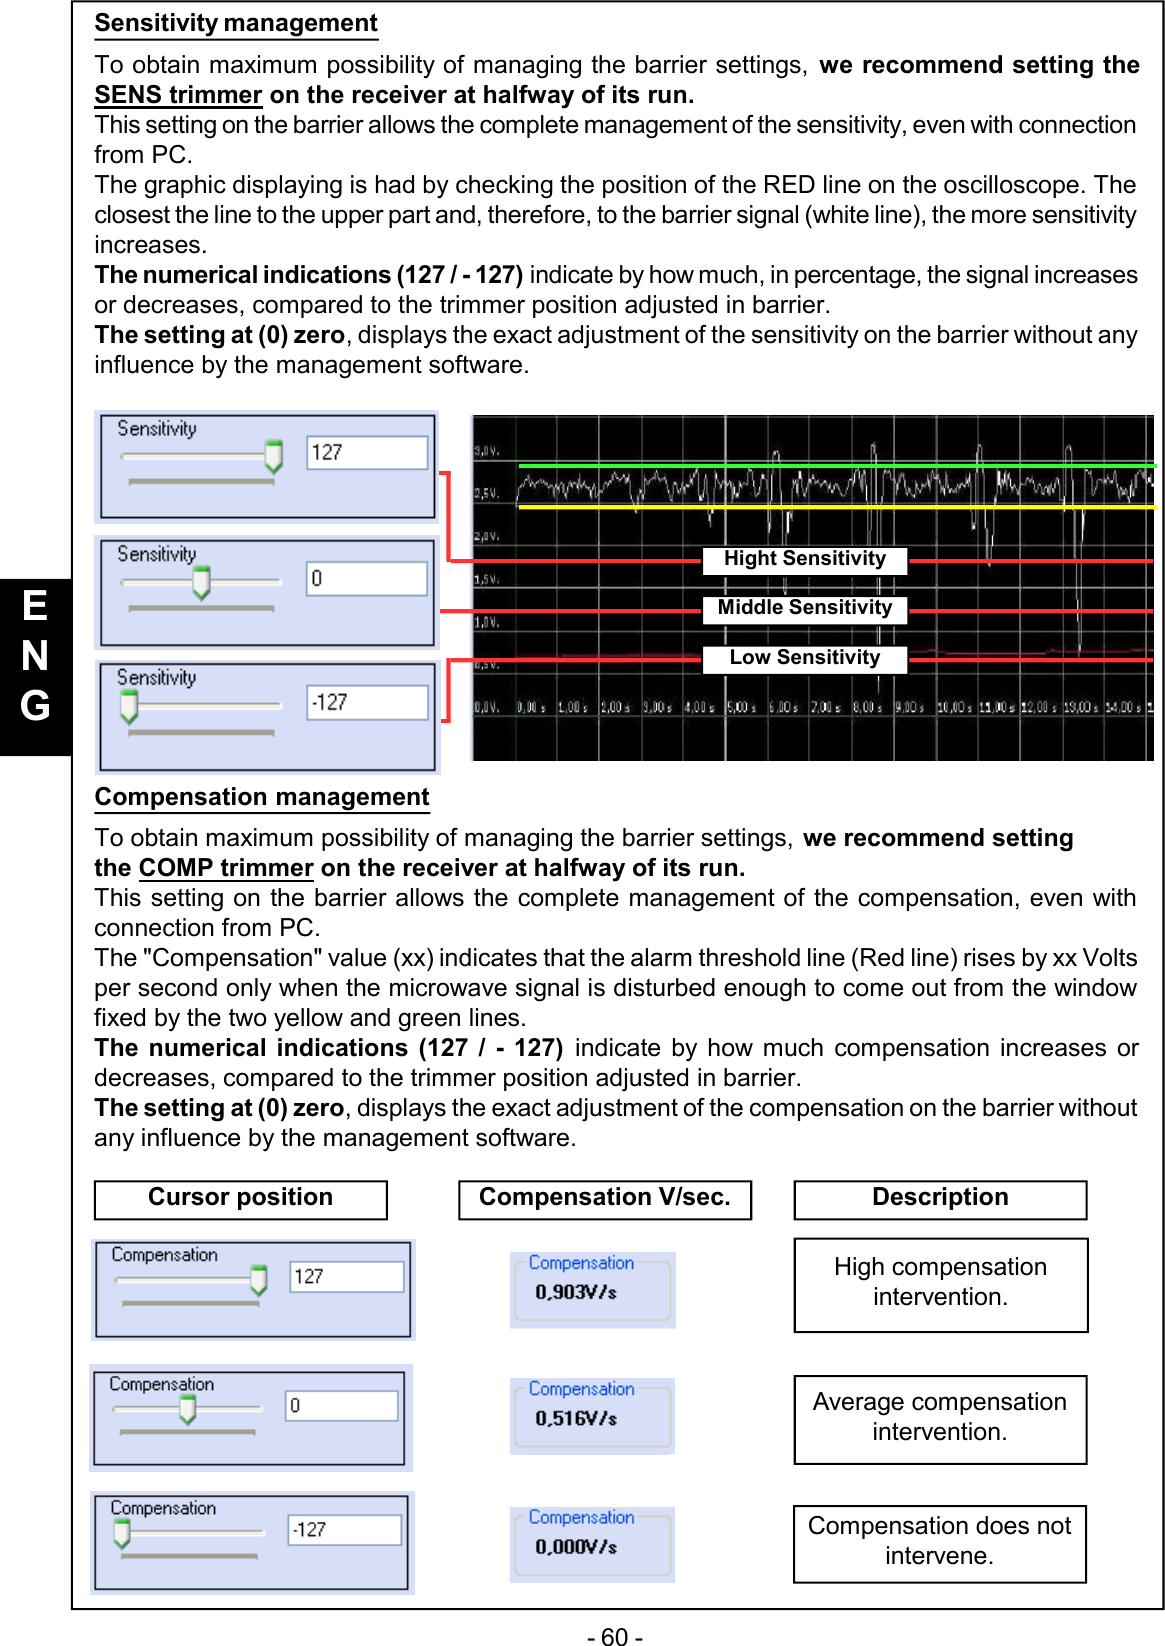 - 60 -Sensitivity managementTo obtain maximum possibility of managing the barrier settings, we recommend setting theSENS trimmer on the receiver at halfway of its run.This setting on the barrier allows the complete management of the sensitivity, even with connectionfrom PC.The graphic displaying is had by checking the position of the RED line on the oscilloscope. Theclosest the line to the upper part and, therefore, to the barrier signal (white line), the more sensitivityincreases.The numerical indications (127 / - 127) indicate by how much, in percentage, the signal increasesor decreases, compared to the trimmer position adjusted in barrier.The setting at (0) zero, displays the exact adjustment of the sensitivity on the barrier without anyinfluence by the management software.Compensation managementTo obtain maximum possibility of managing the barrier settings, we recommend settingthe COMP trimmer on the receiver at halfway of its run.This setting on the barrier allows the complete management of the compensation, even withconnection from PC.The &quot;Compensation&quot; value (xx) indicates that the alarm threshold line (Red line) rises by xx Voltsper second only when the microwave signal is disturbed enough to come out from the windowfixed by the two yellow and green lines.The numerical indications (127 / - 127) indicate by how much compensation increases ordecreases, compared to the trimmer position adjusted in barrier.The setting at (0) zero, displays the exact adjustment of the compensation on the barrier withoutany influence by the management software.Low SensitivityMiddle SensitivityCursor position Compensation V/sec. DescriptionHigh compensationintervention.Average compensationintervention.Compensation does notintervene.Hight SensitivityENG